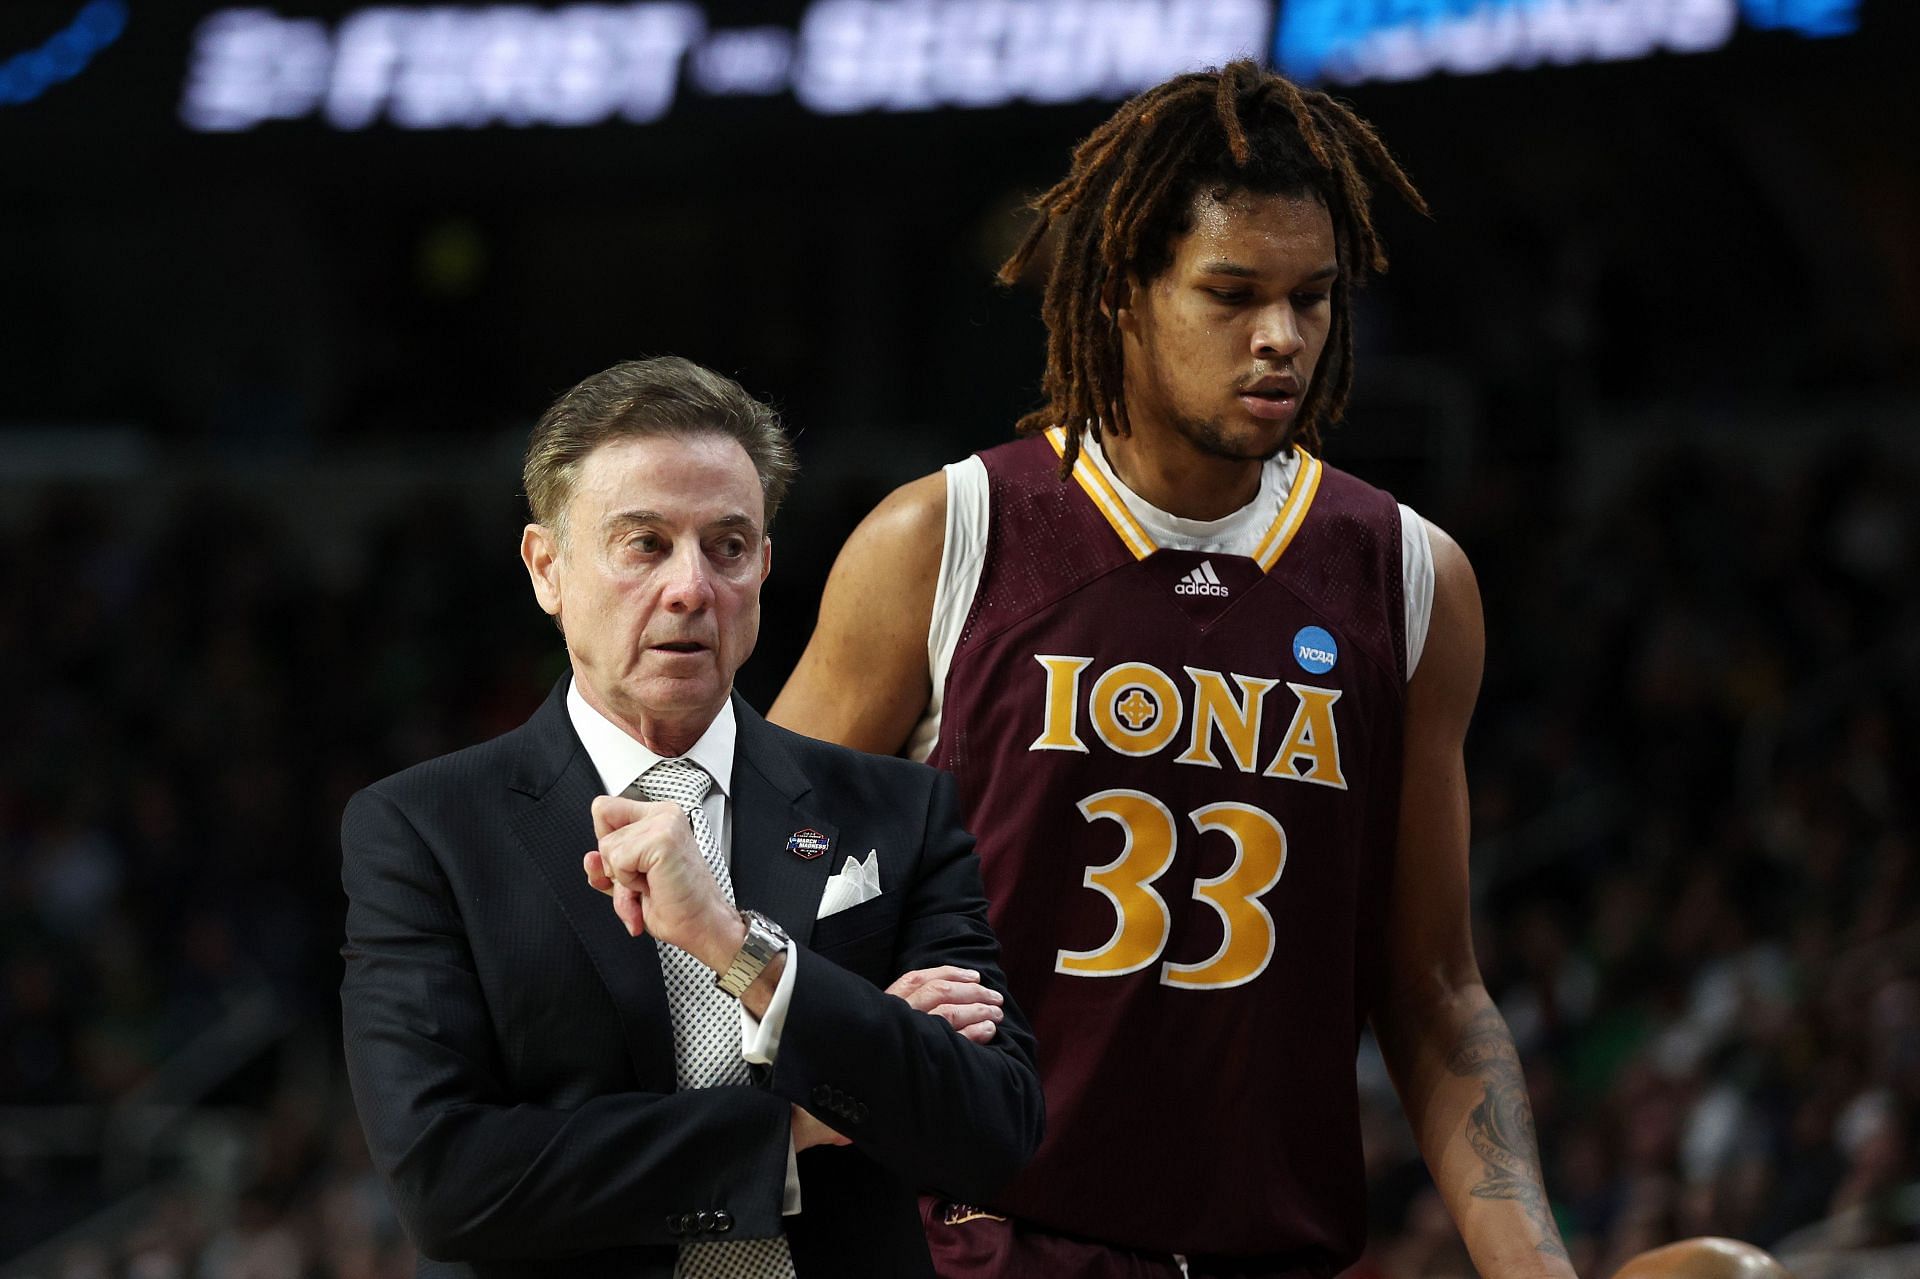 Rick Pitino, then at Iona, is one of only a handful of coaches to claim multiple national titles, even if the 2013 victory was vacated by the NCAA.